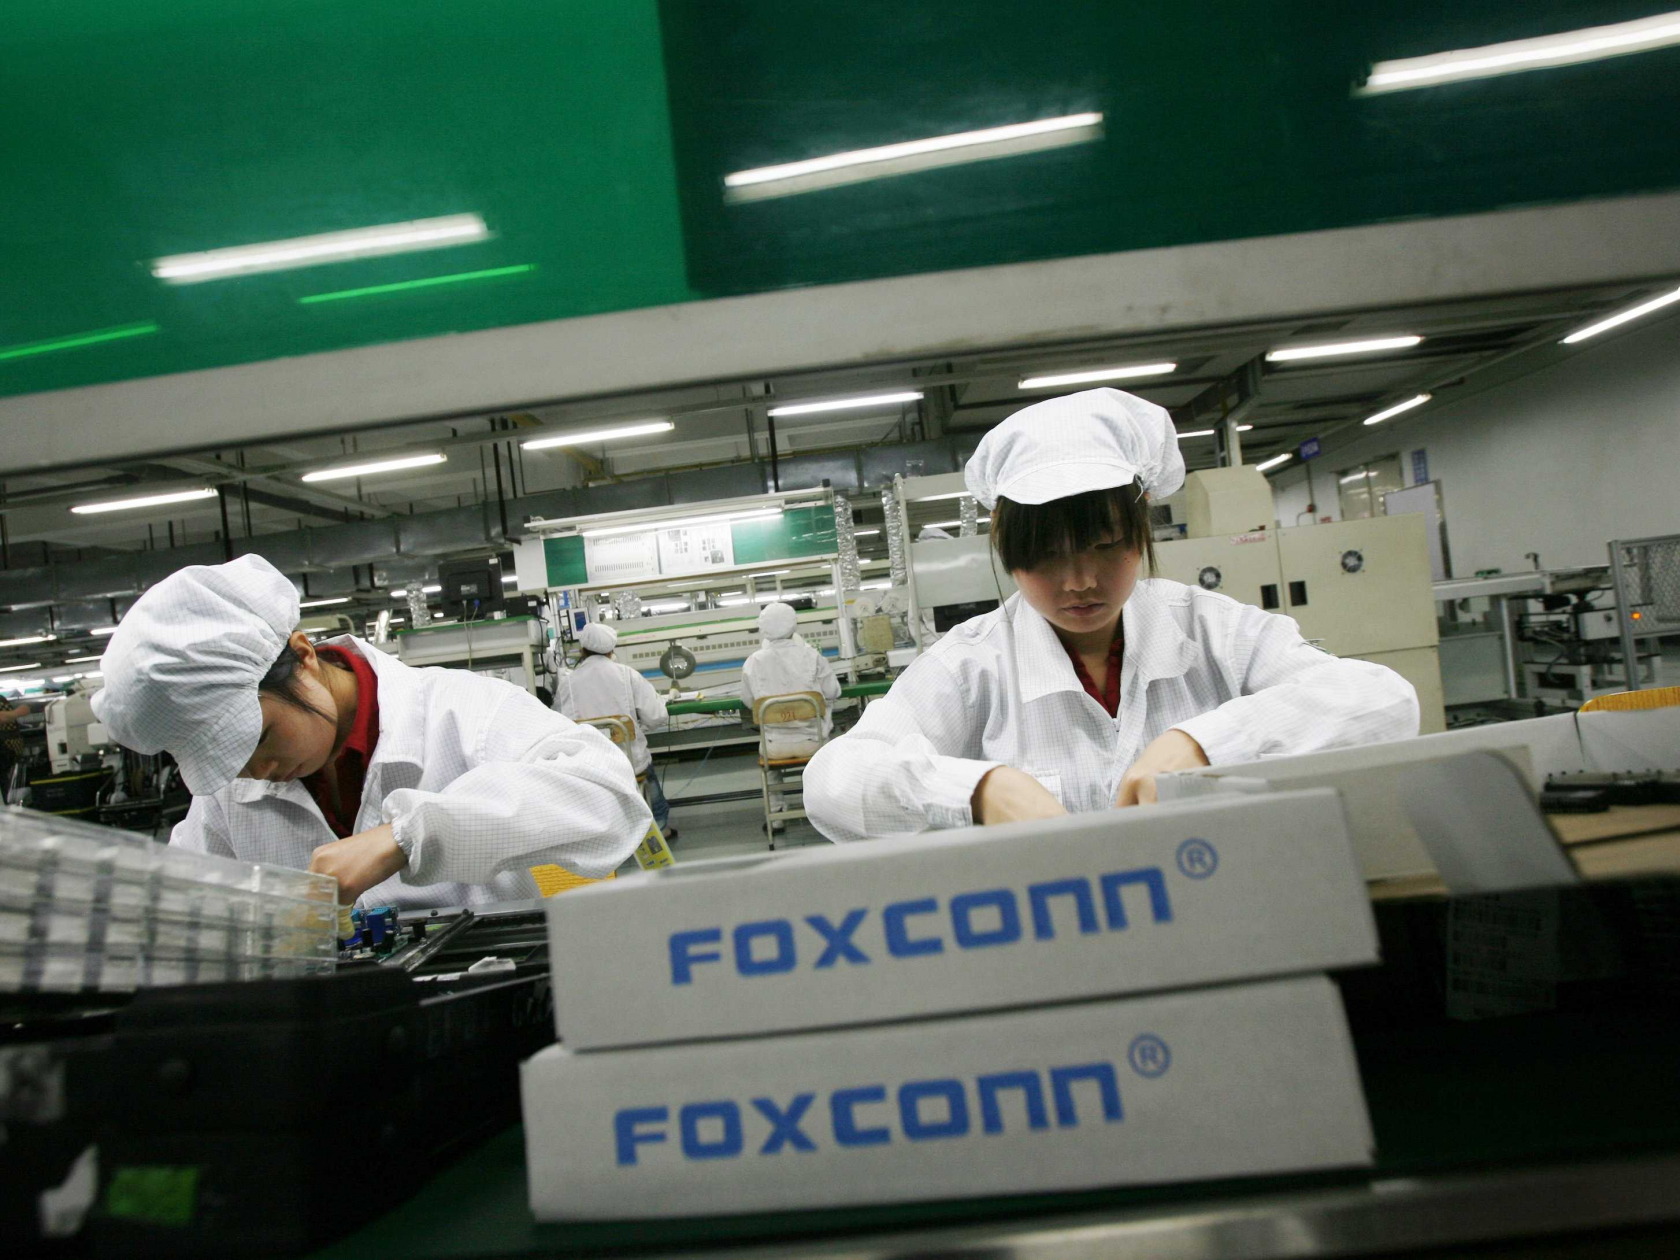 Foxconn chooses Mount Pleasant, Wisconsin for its $10 billion manufacturing facility